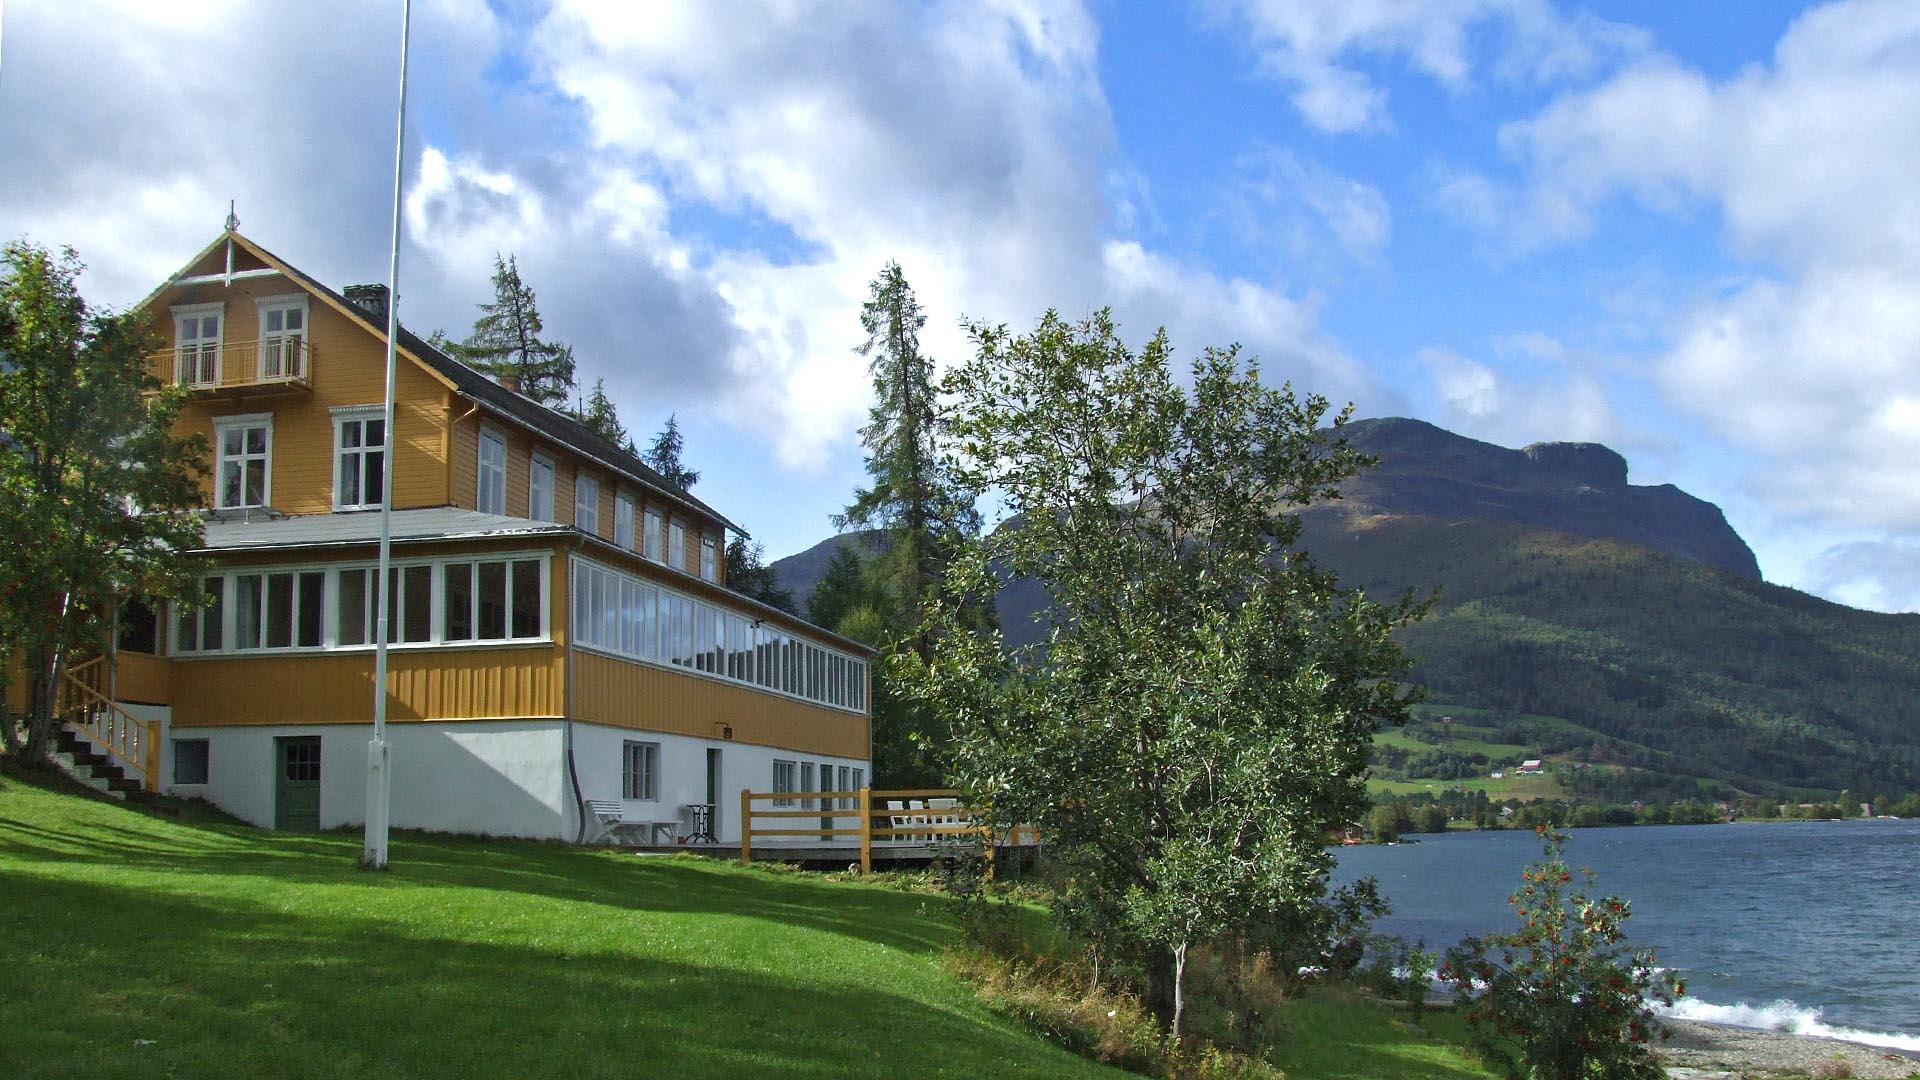 A charming yellow-painted small wooden hotel on a lakefront with a lawn in the fore- and a mountain in the background